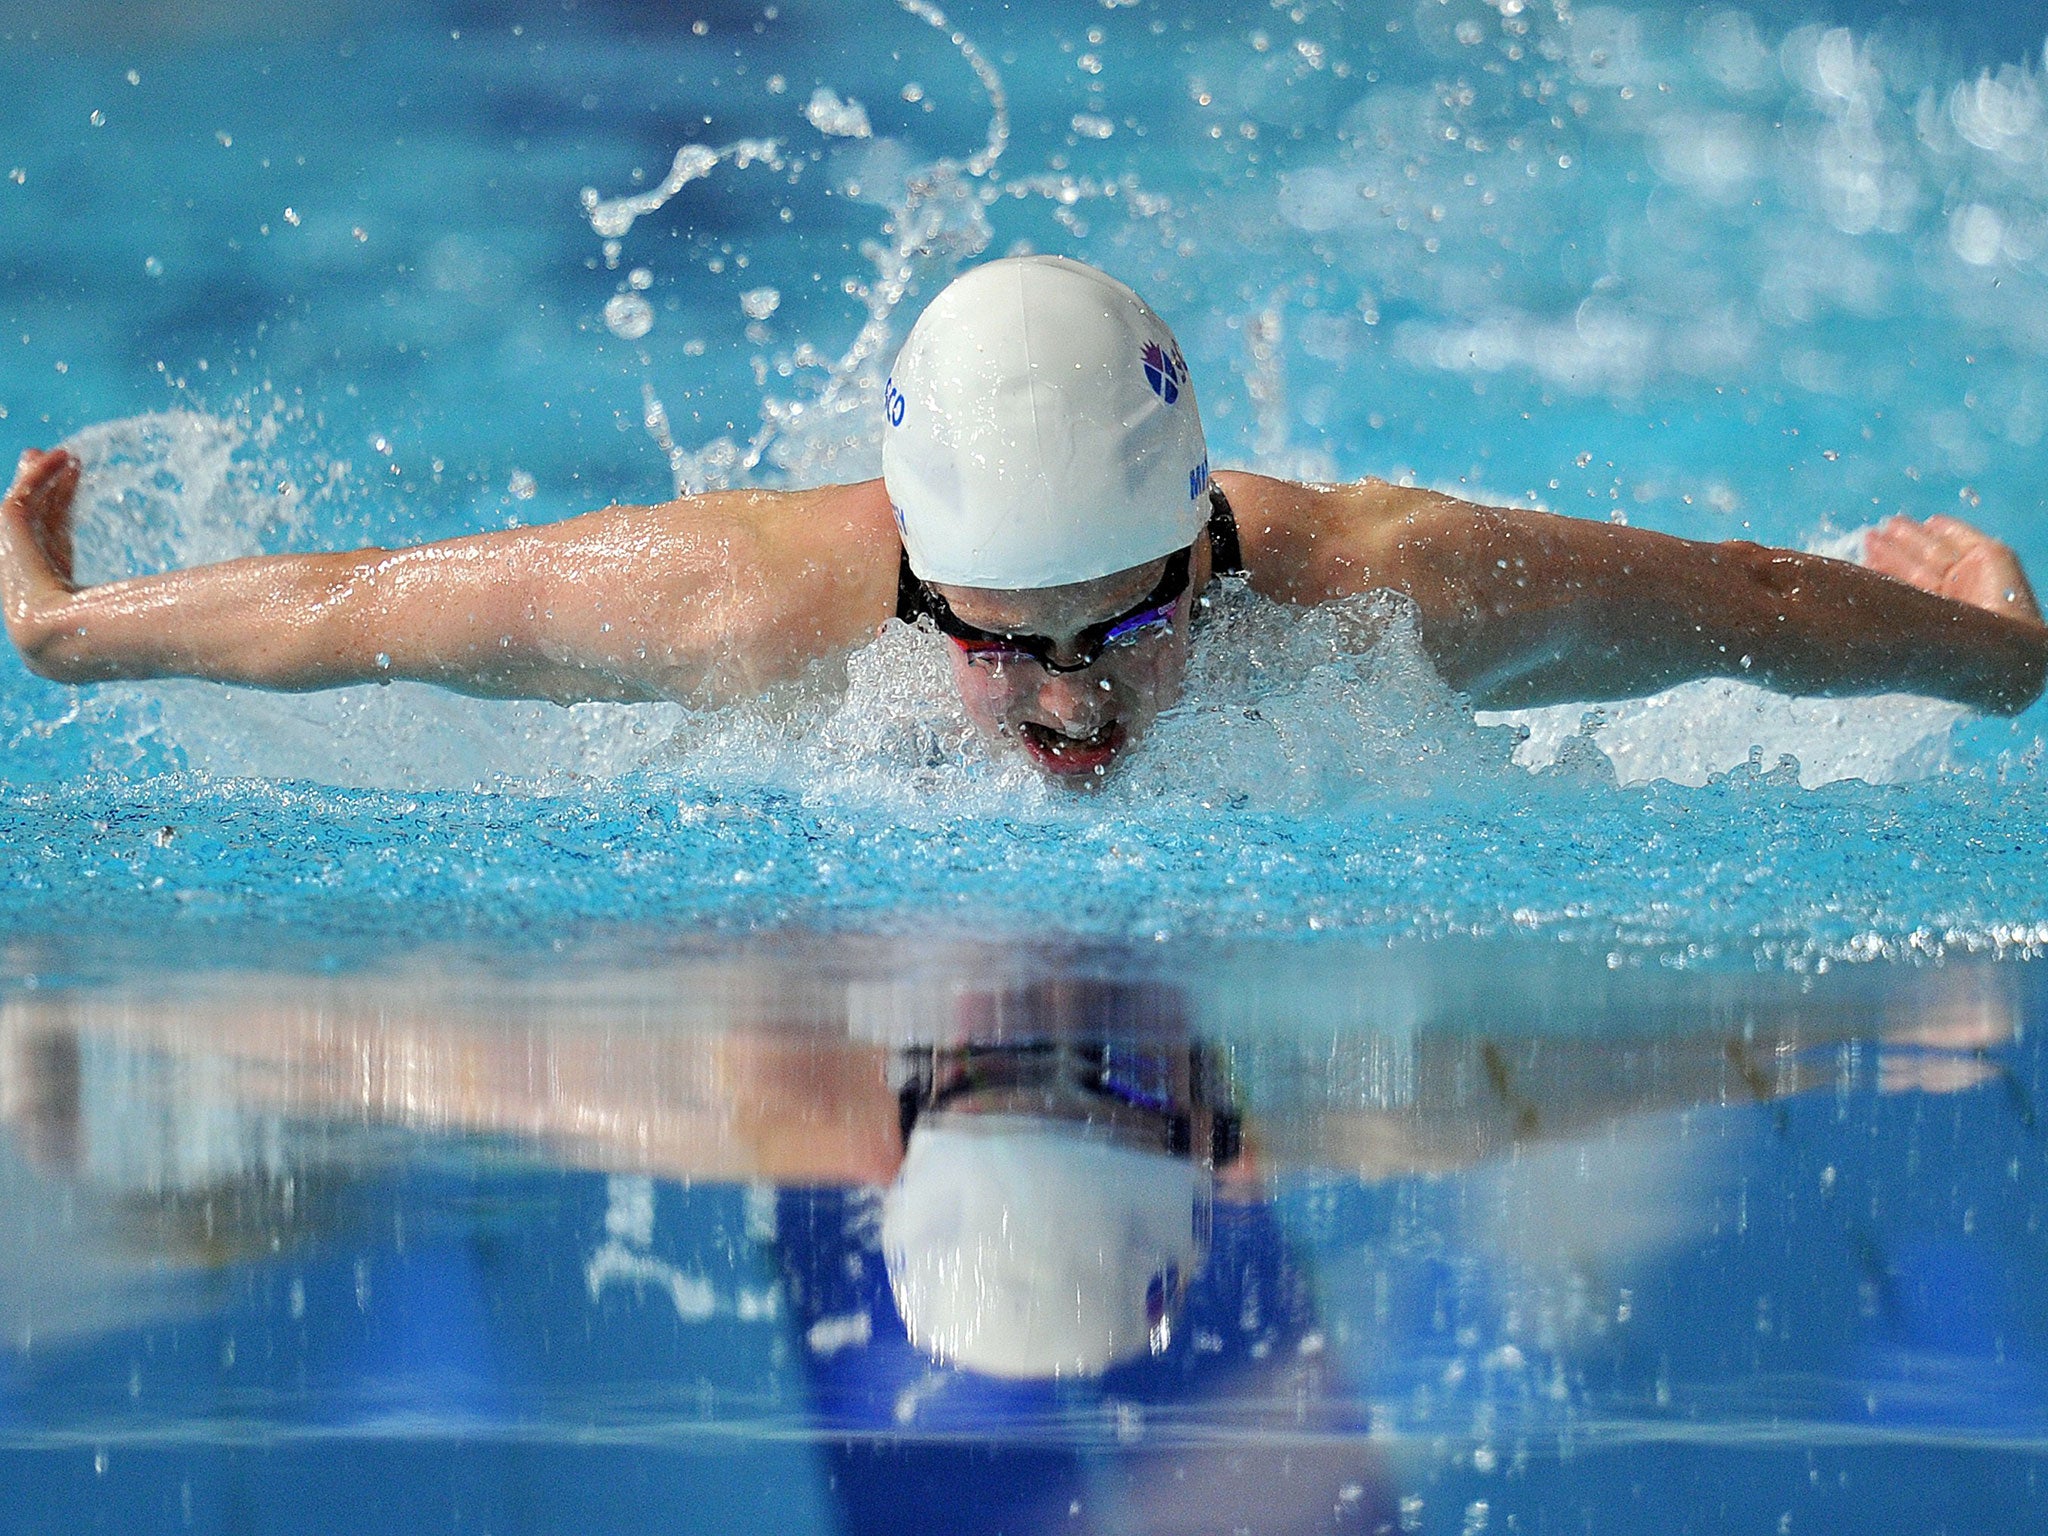 Hannah Miley of England competes in the Women's 400m Individual Medley heat during the 2014 Commonwealth Games